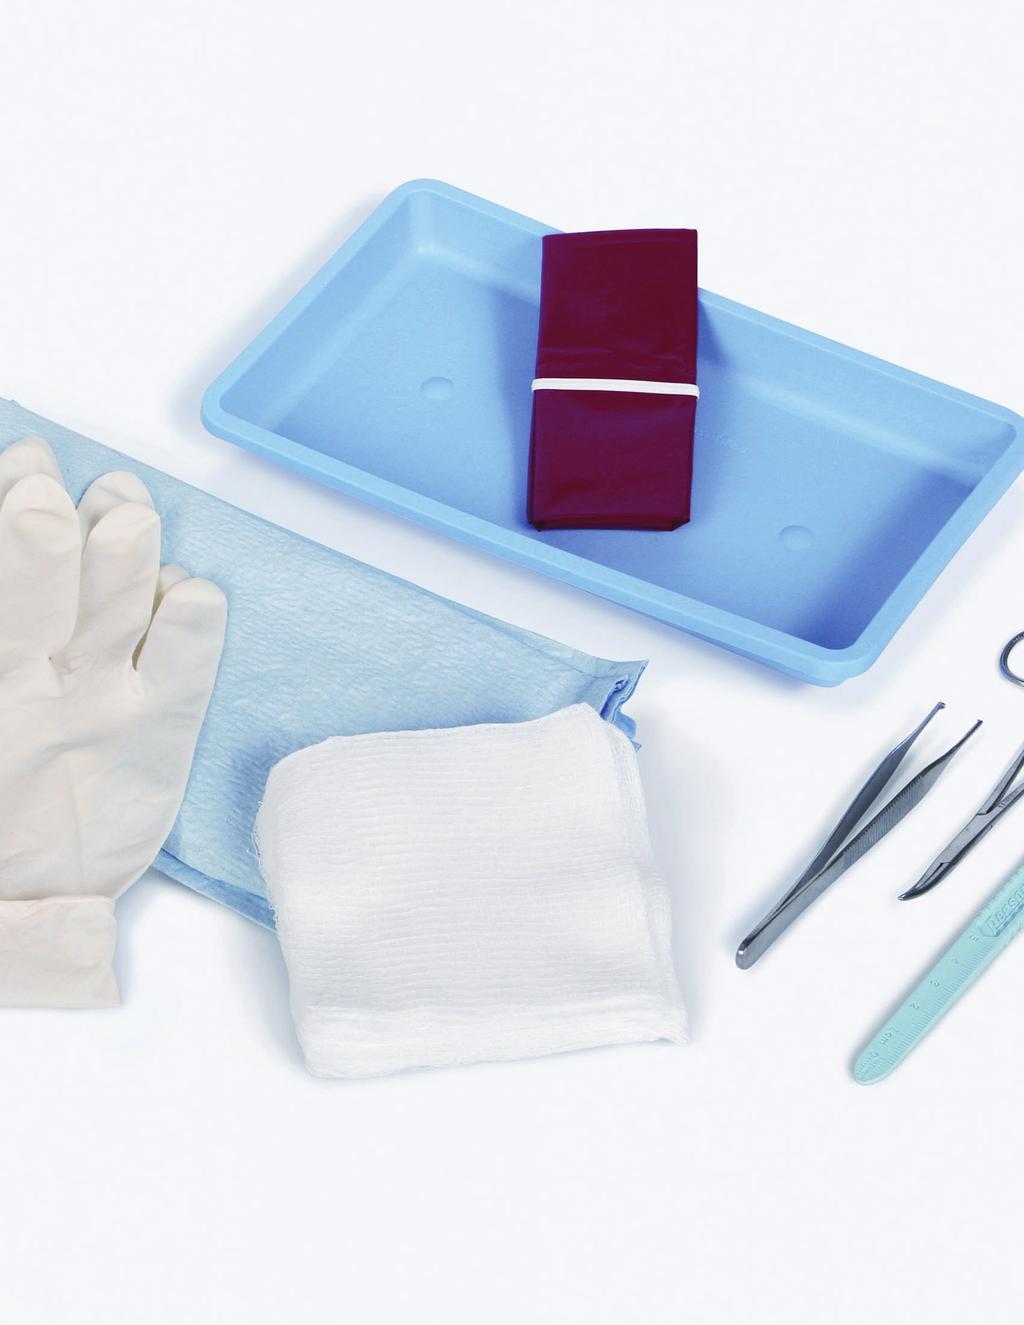 General Woundcare Trays